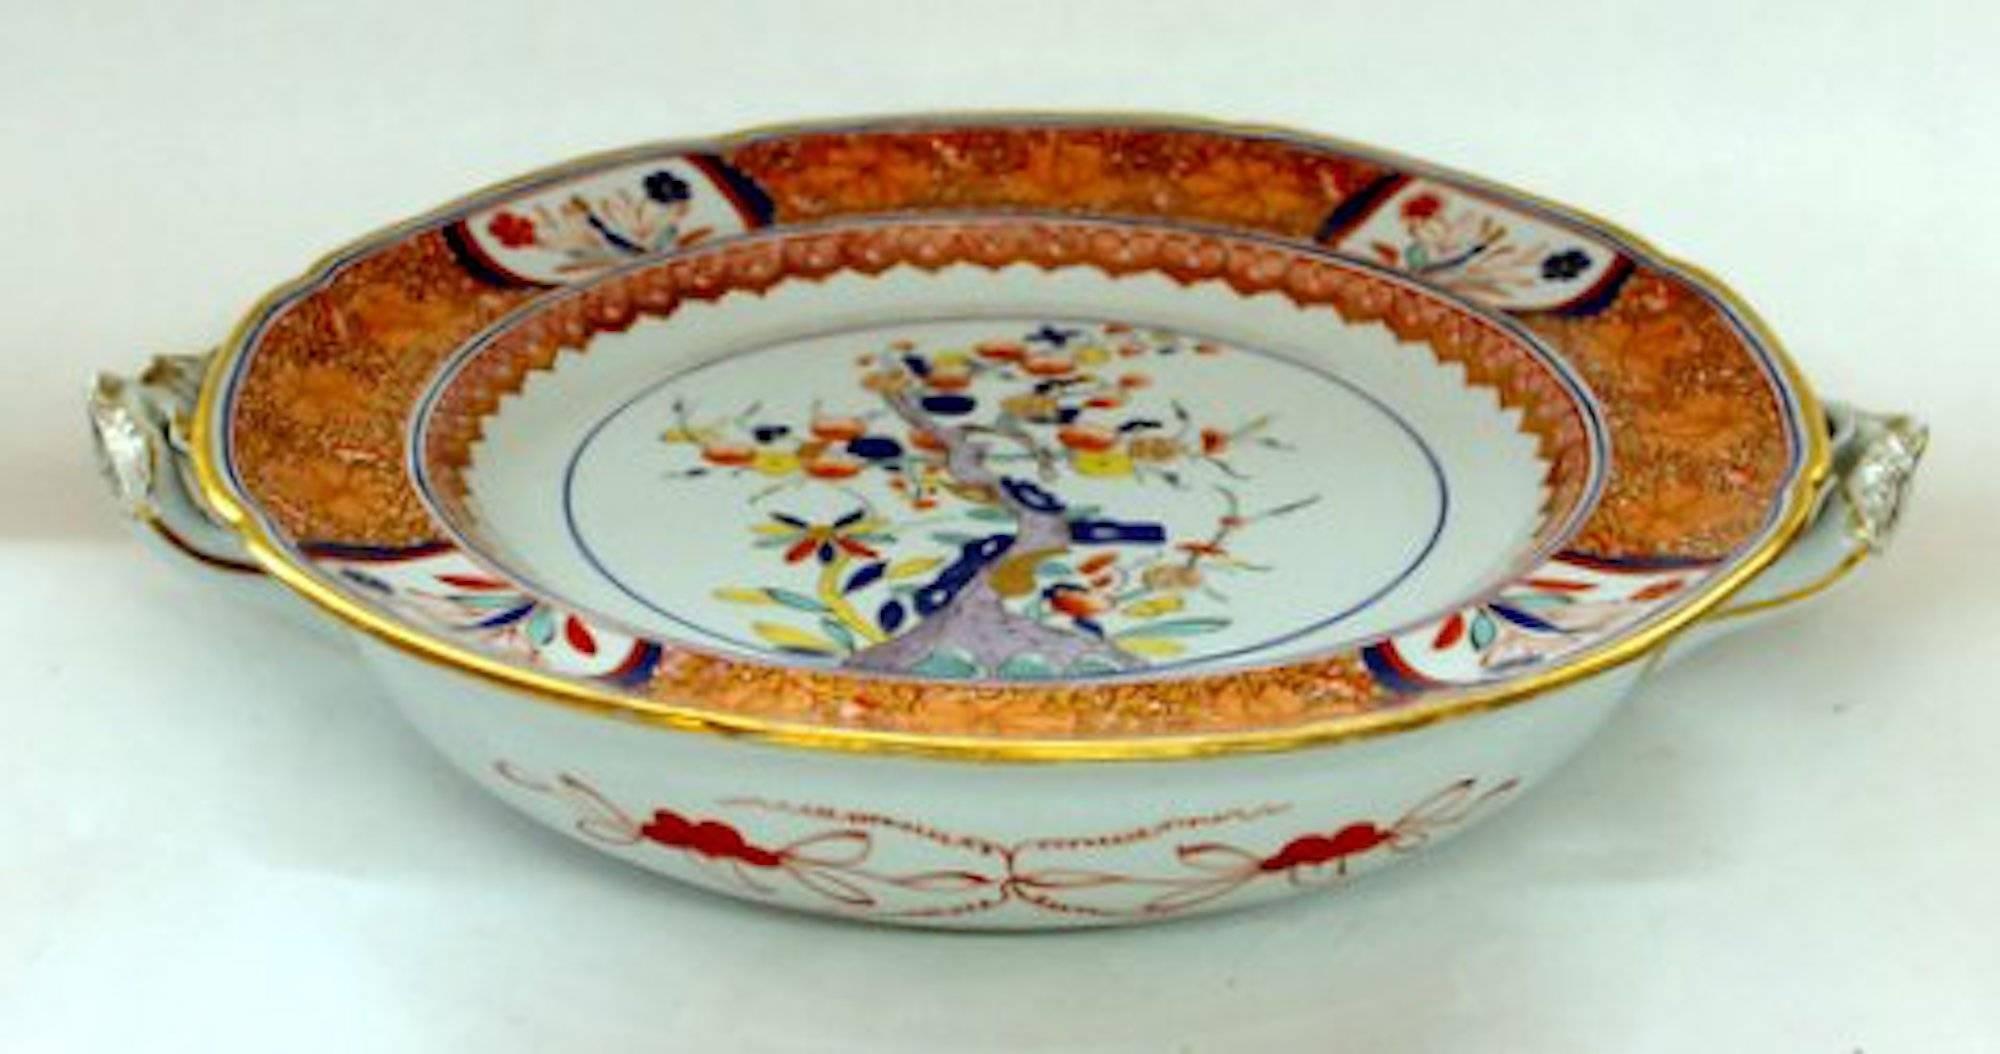 Exceedingly rare antique English Spode ironstone Kakiemon decor warming dish. 

A/F slight clips to leaf near handle.

Pattern number as recorded on Pg. 119 of 